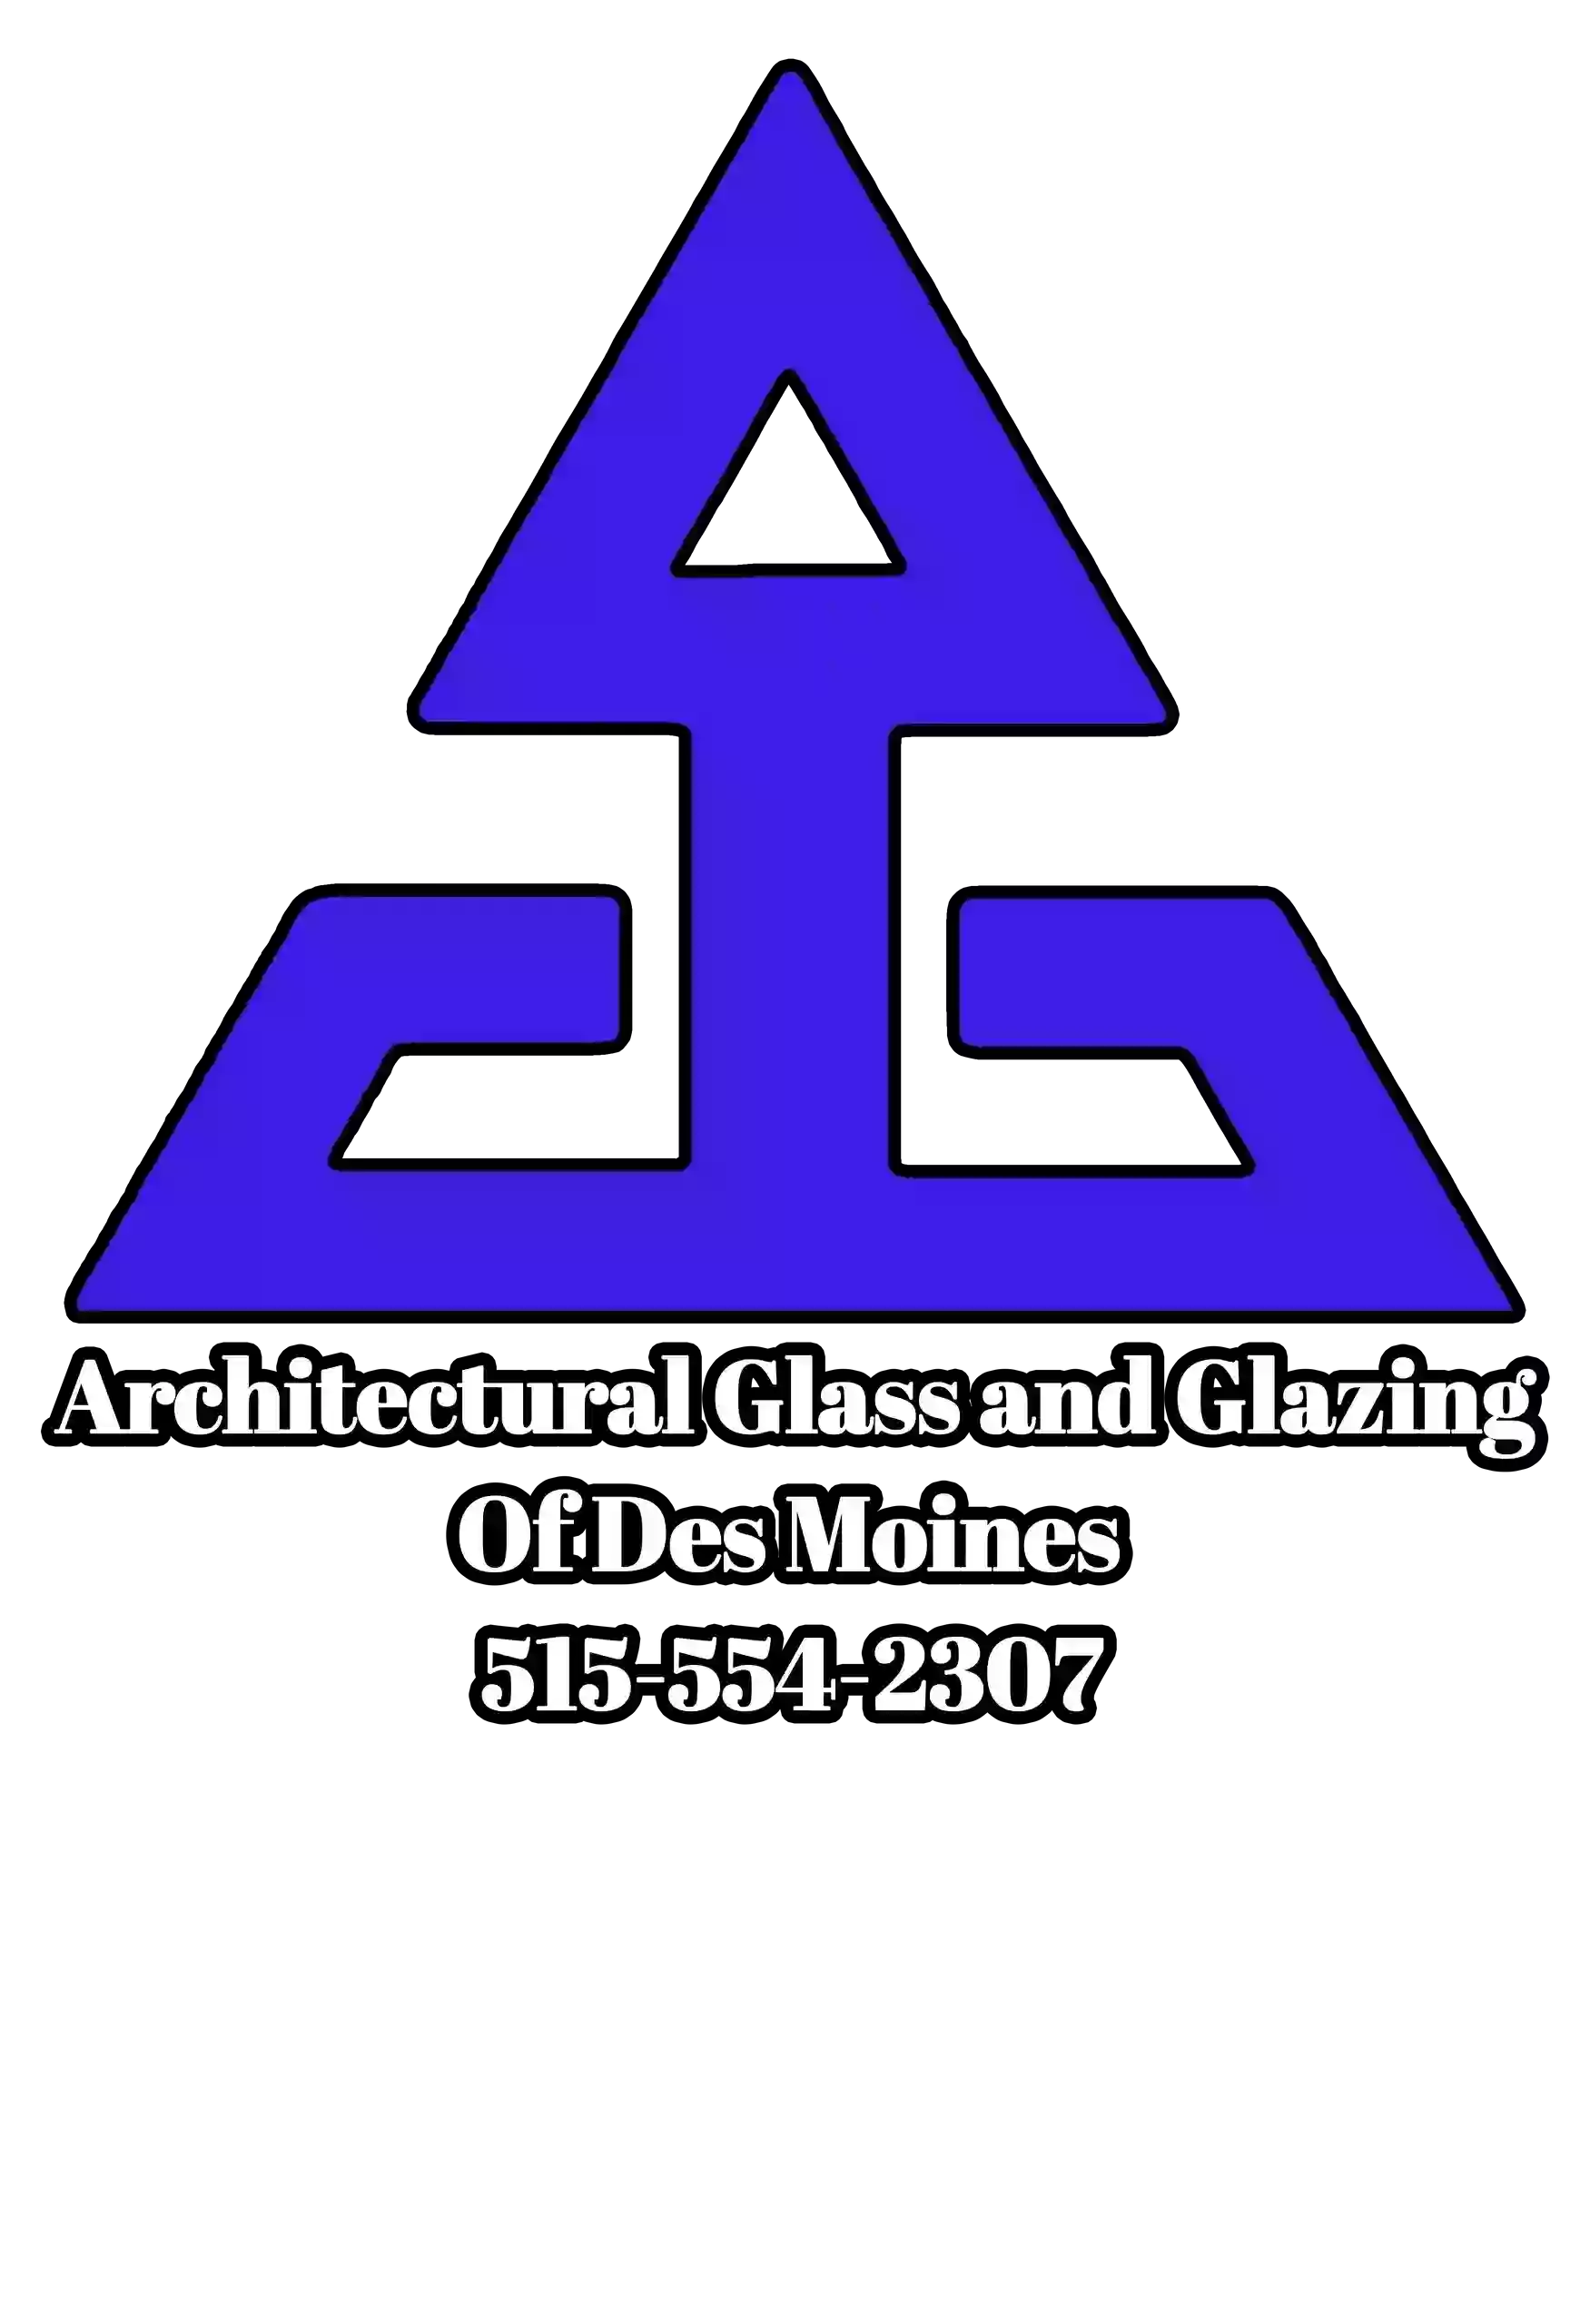 Architectural Glass and Glazing of Des Moines